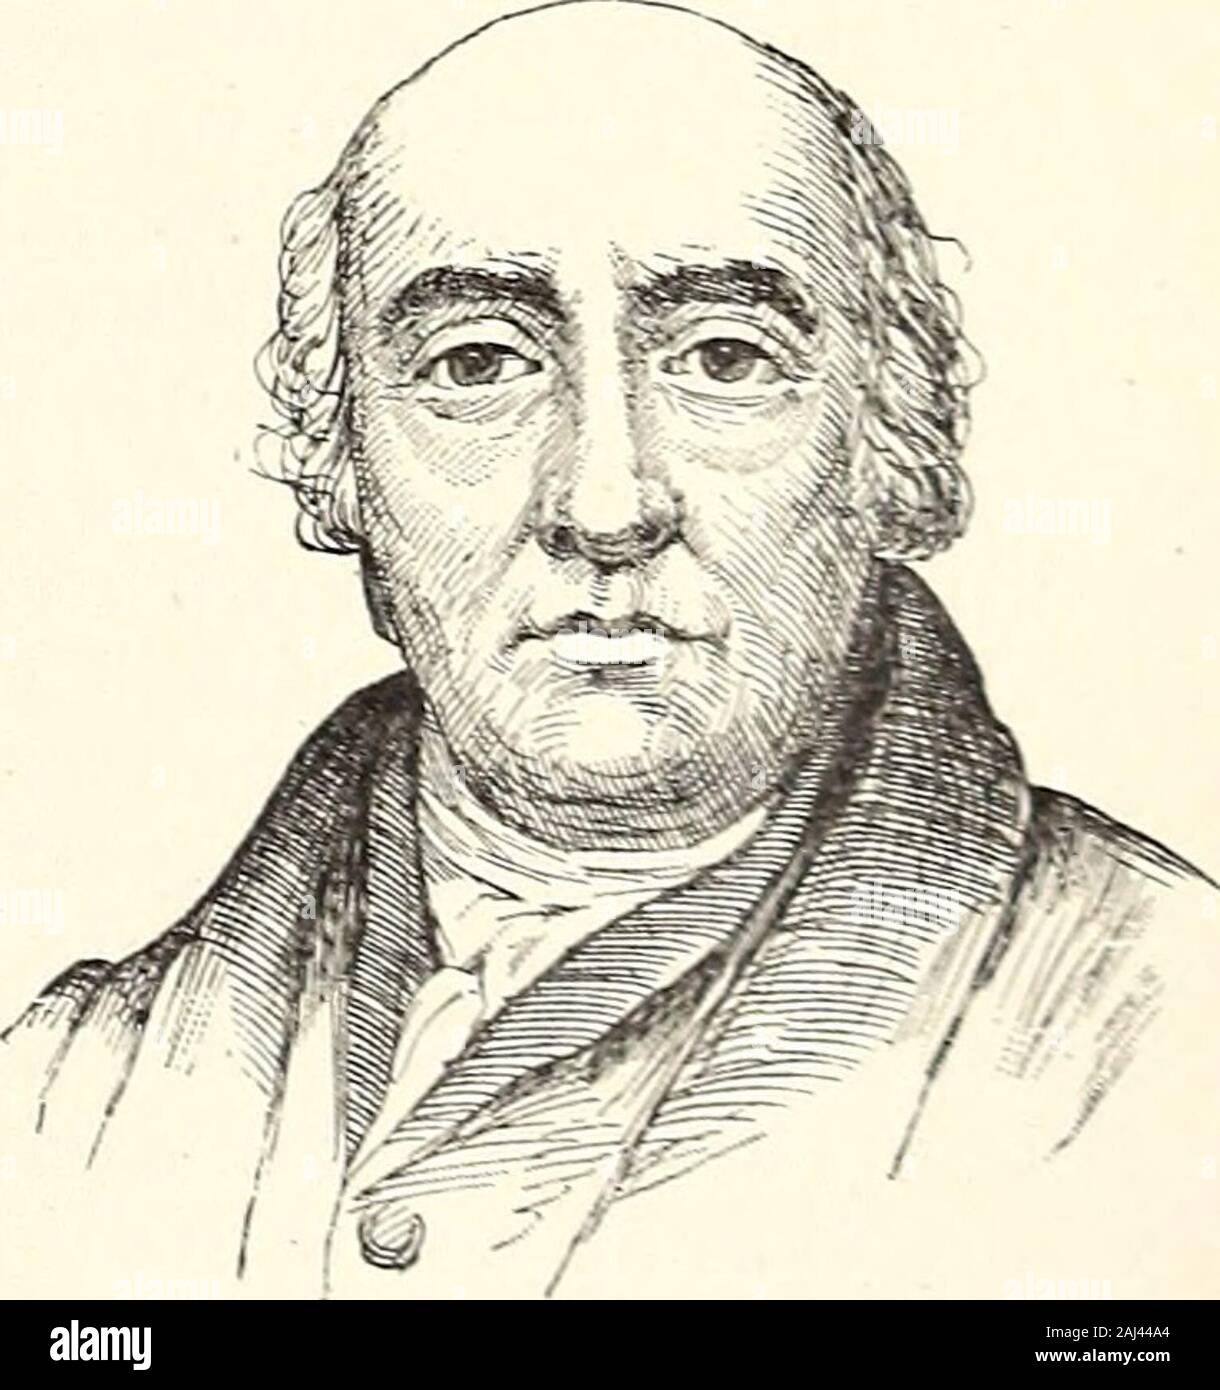 Appletons' cyclopædia of American biography . always had a fondness. Hestudied law in the Temple, London, for two years,and in 1791 was admitted to the Dublin bar, ofwhich he soon became a prominent member. Heearly became a leader of the United Irishmen,an association whose object was to make Irelandan independent republic, and was one of the com-mittee whose duty it was to supervise all branchesof the society through the country. Disclosuresbeing made to the government, Emmet was appre-hended by orderof the privy coun-cil in 1798, con-fined in Kilmain-ham jail, Dublin,and, being prom-ised his Stock Photo